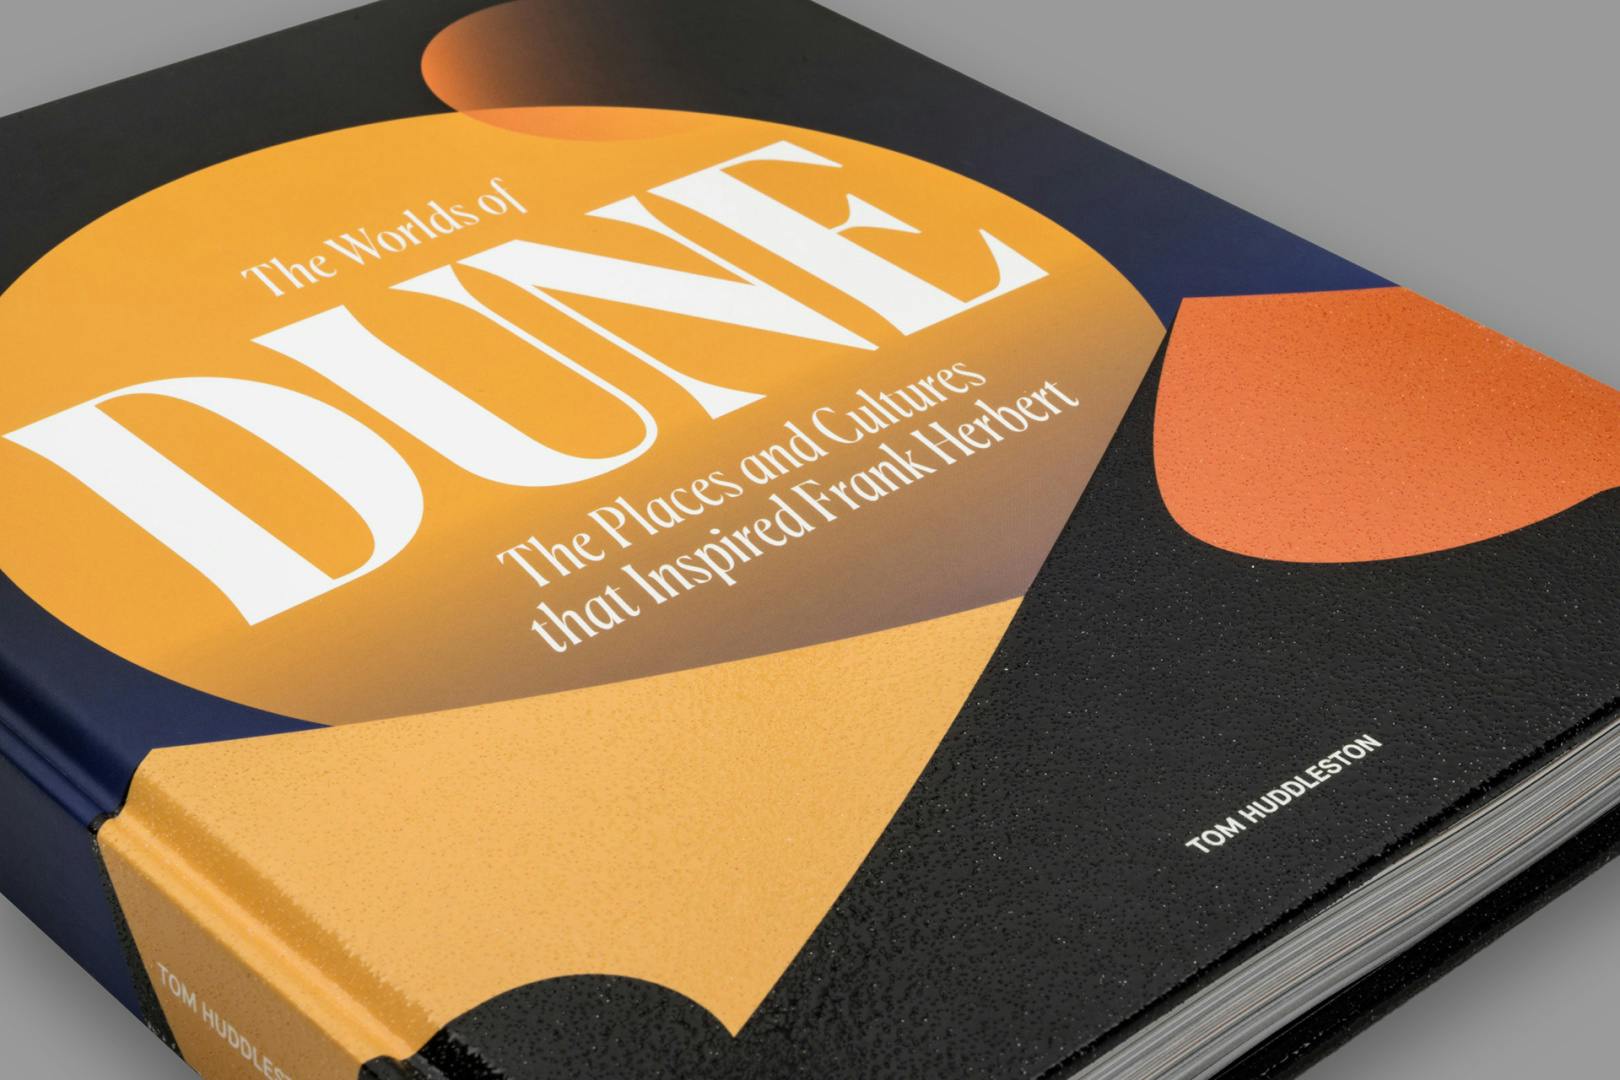 Close-up image of the front cover of a book about Dune, featuring minimal illustrations representing sand dunes, and a large planet-like circle looming over the top